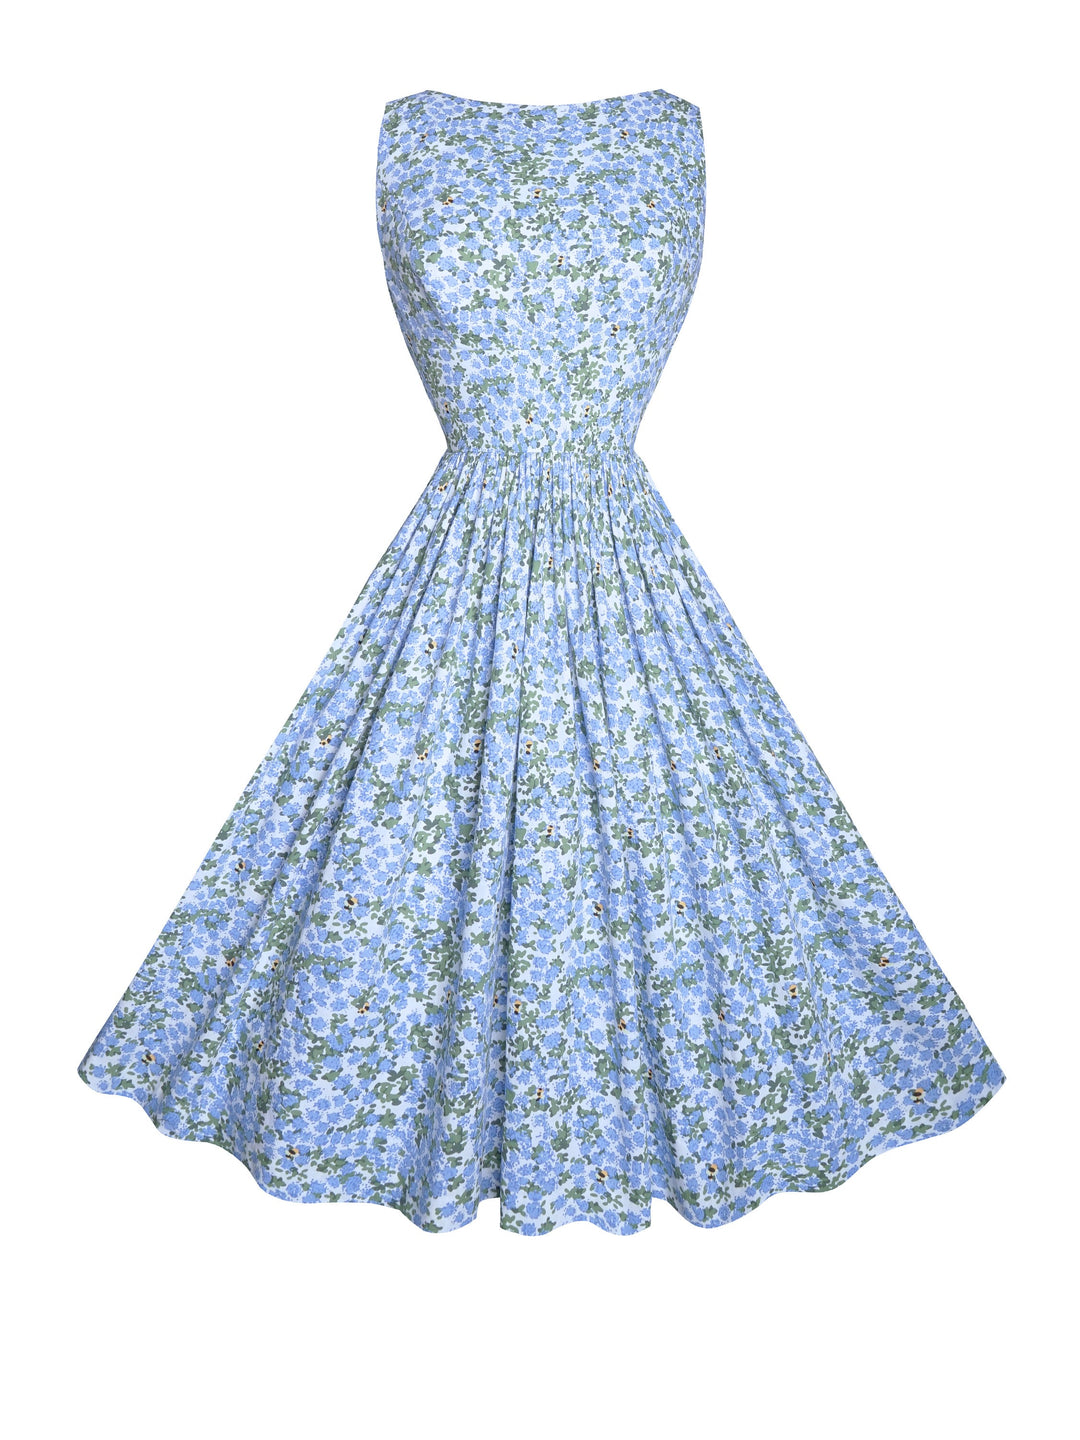 MTO - Madeline Dress "Beeloved Blooms"